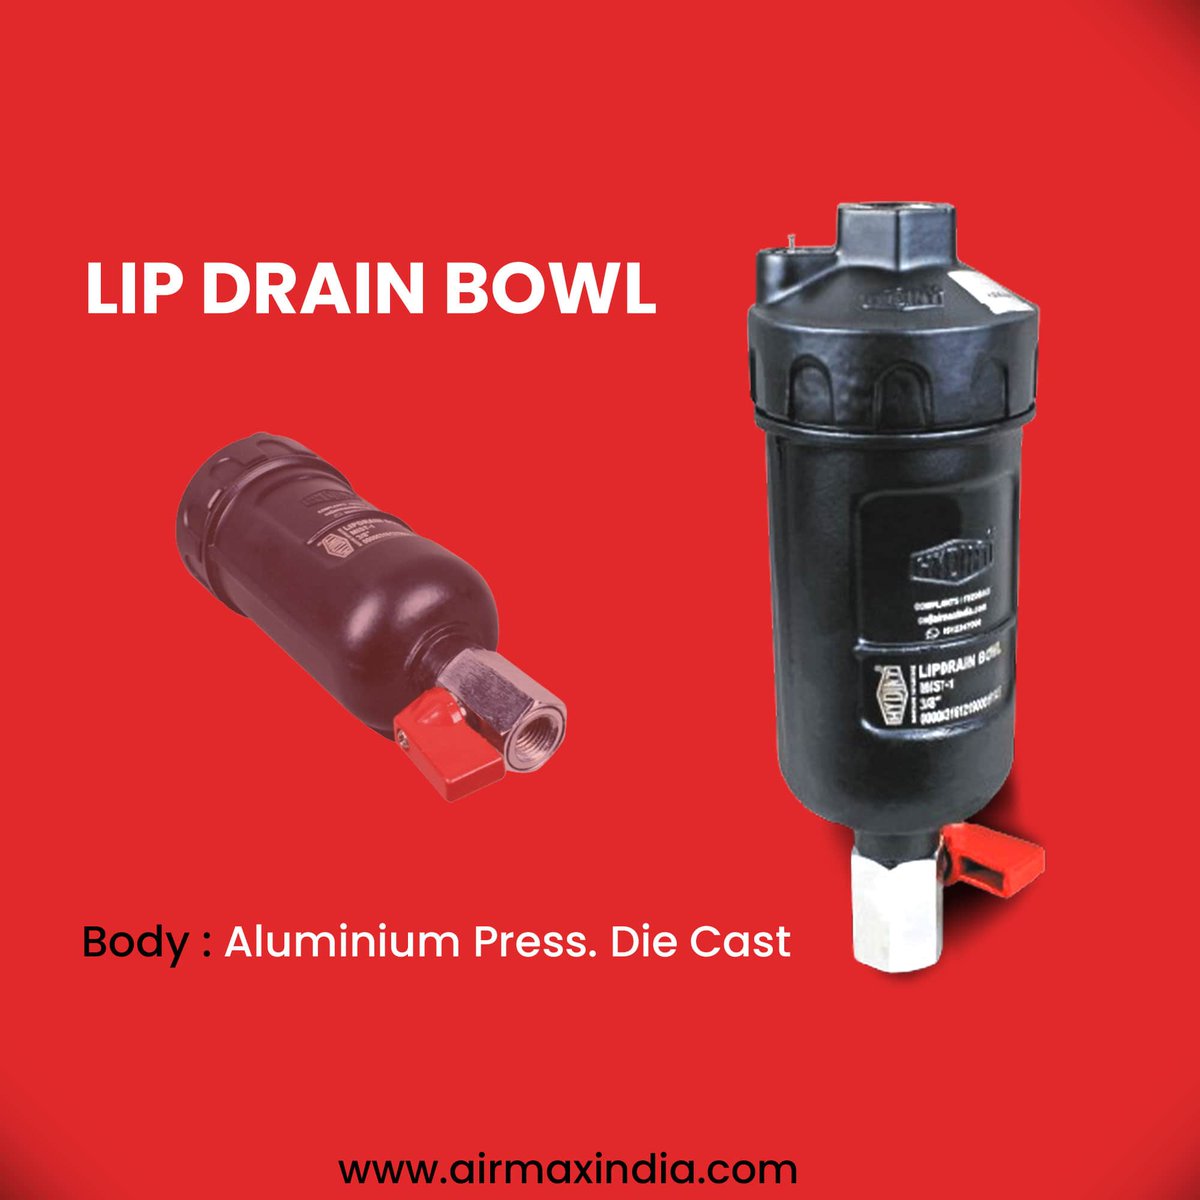 From moisture management to exact manufacturing, our lip drain bowls are the invisible leaders of your pneumatic system. Trust Airmax Pneumatics for reliability and performance.

#AirmaxPneumatics #Trusted #Quality #Manufacturer #Exporter #Technology #MakeInIndia #G20 #India